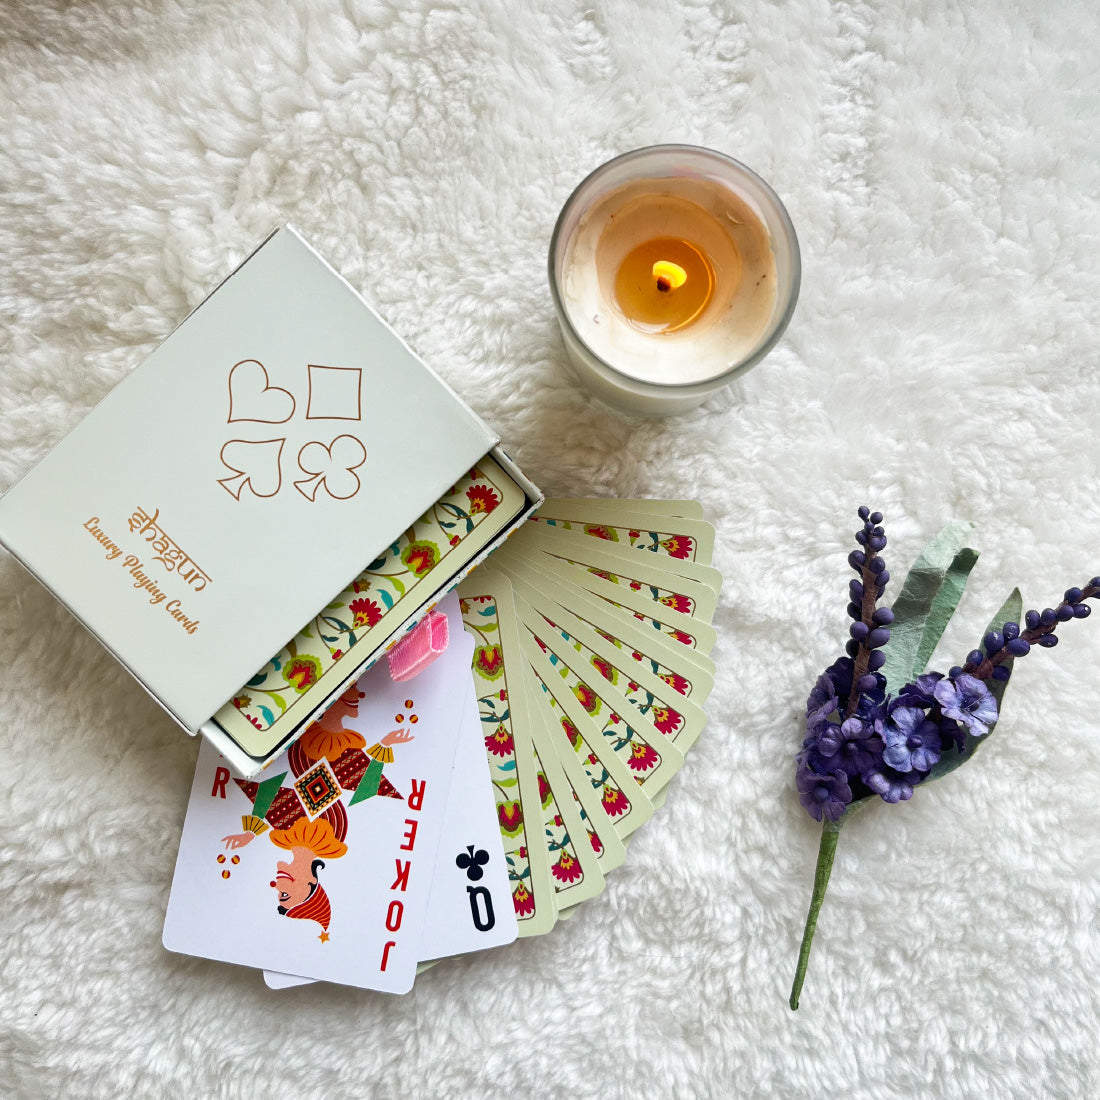 Shagun (Floral) Luxury Playing Cards Playing Cards | Festive Season | Gold Foiled | 55 Cards Deck